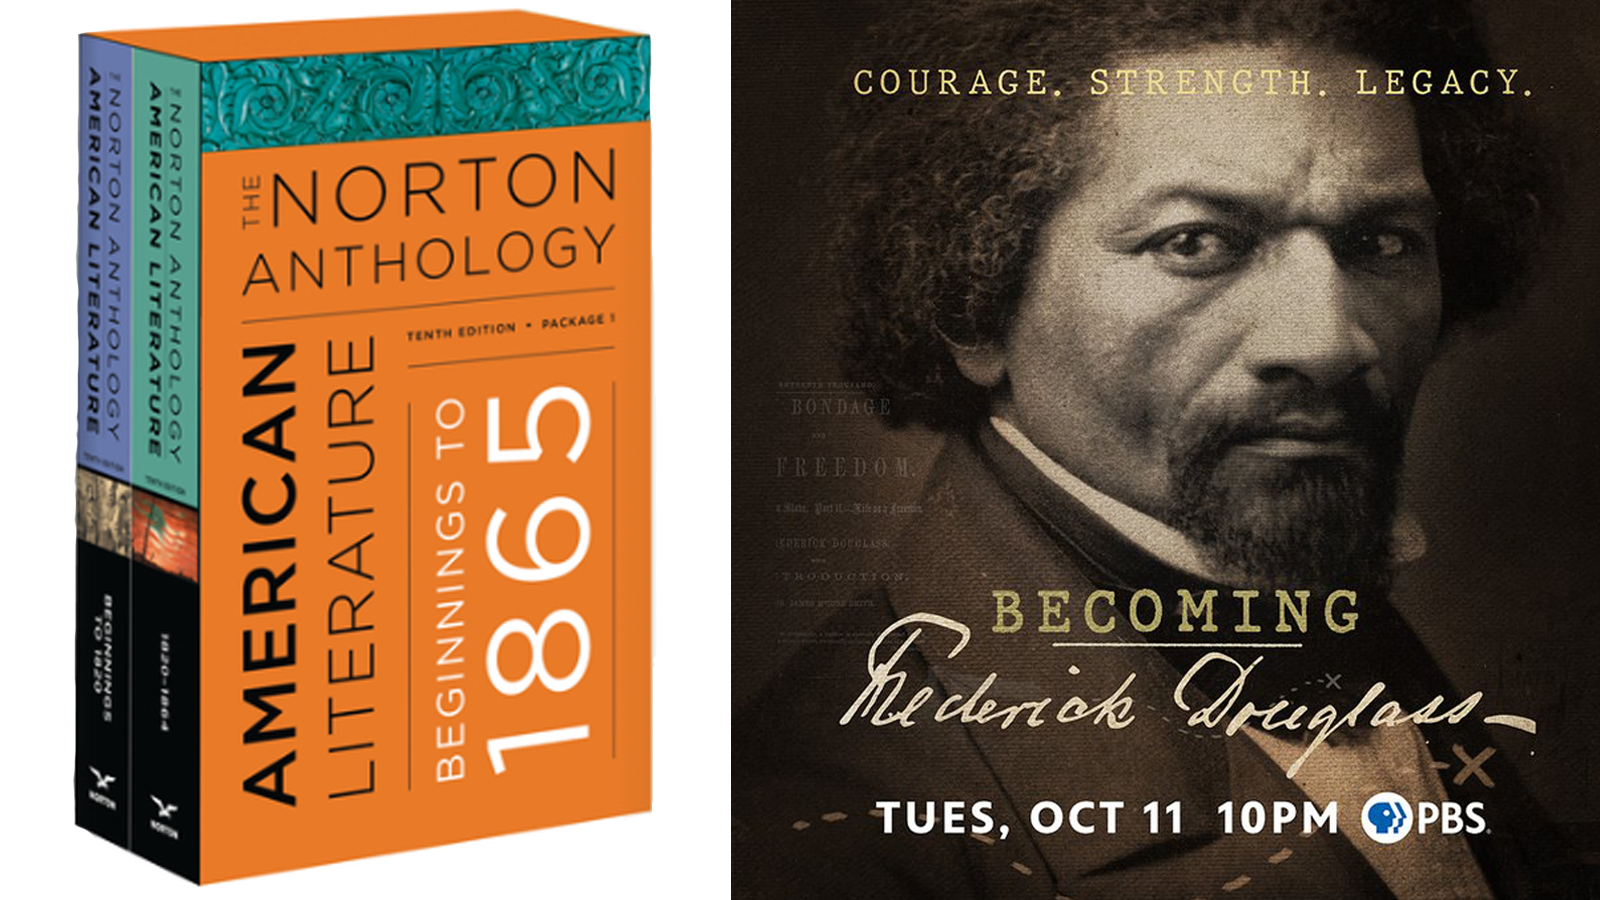 An image of the new 1oth edition of the Norton Anthology of American Literature and an image of Frederick Douglass for a documentary Becoming Frederick Douglass